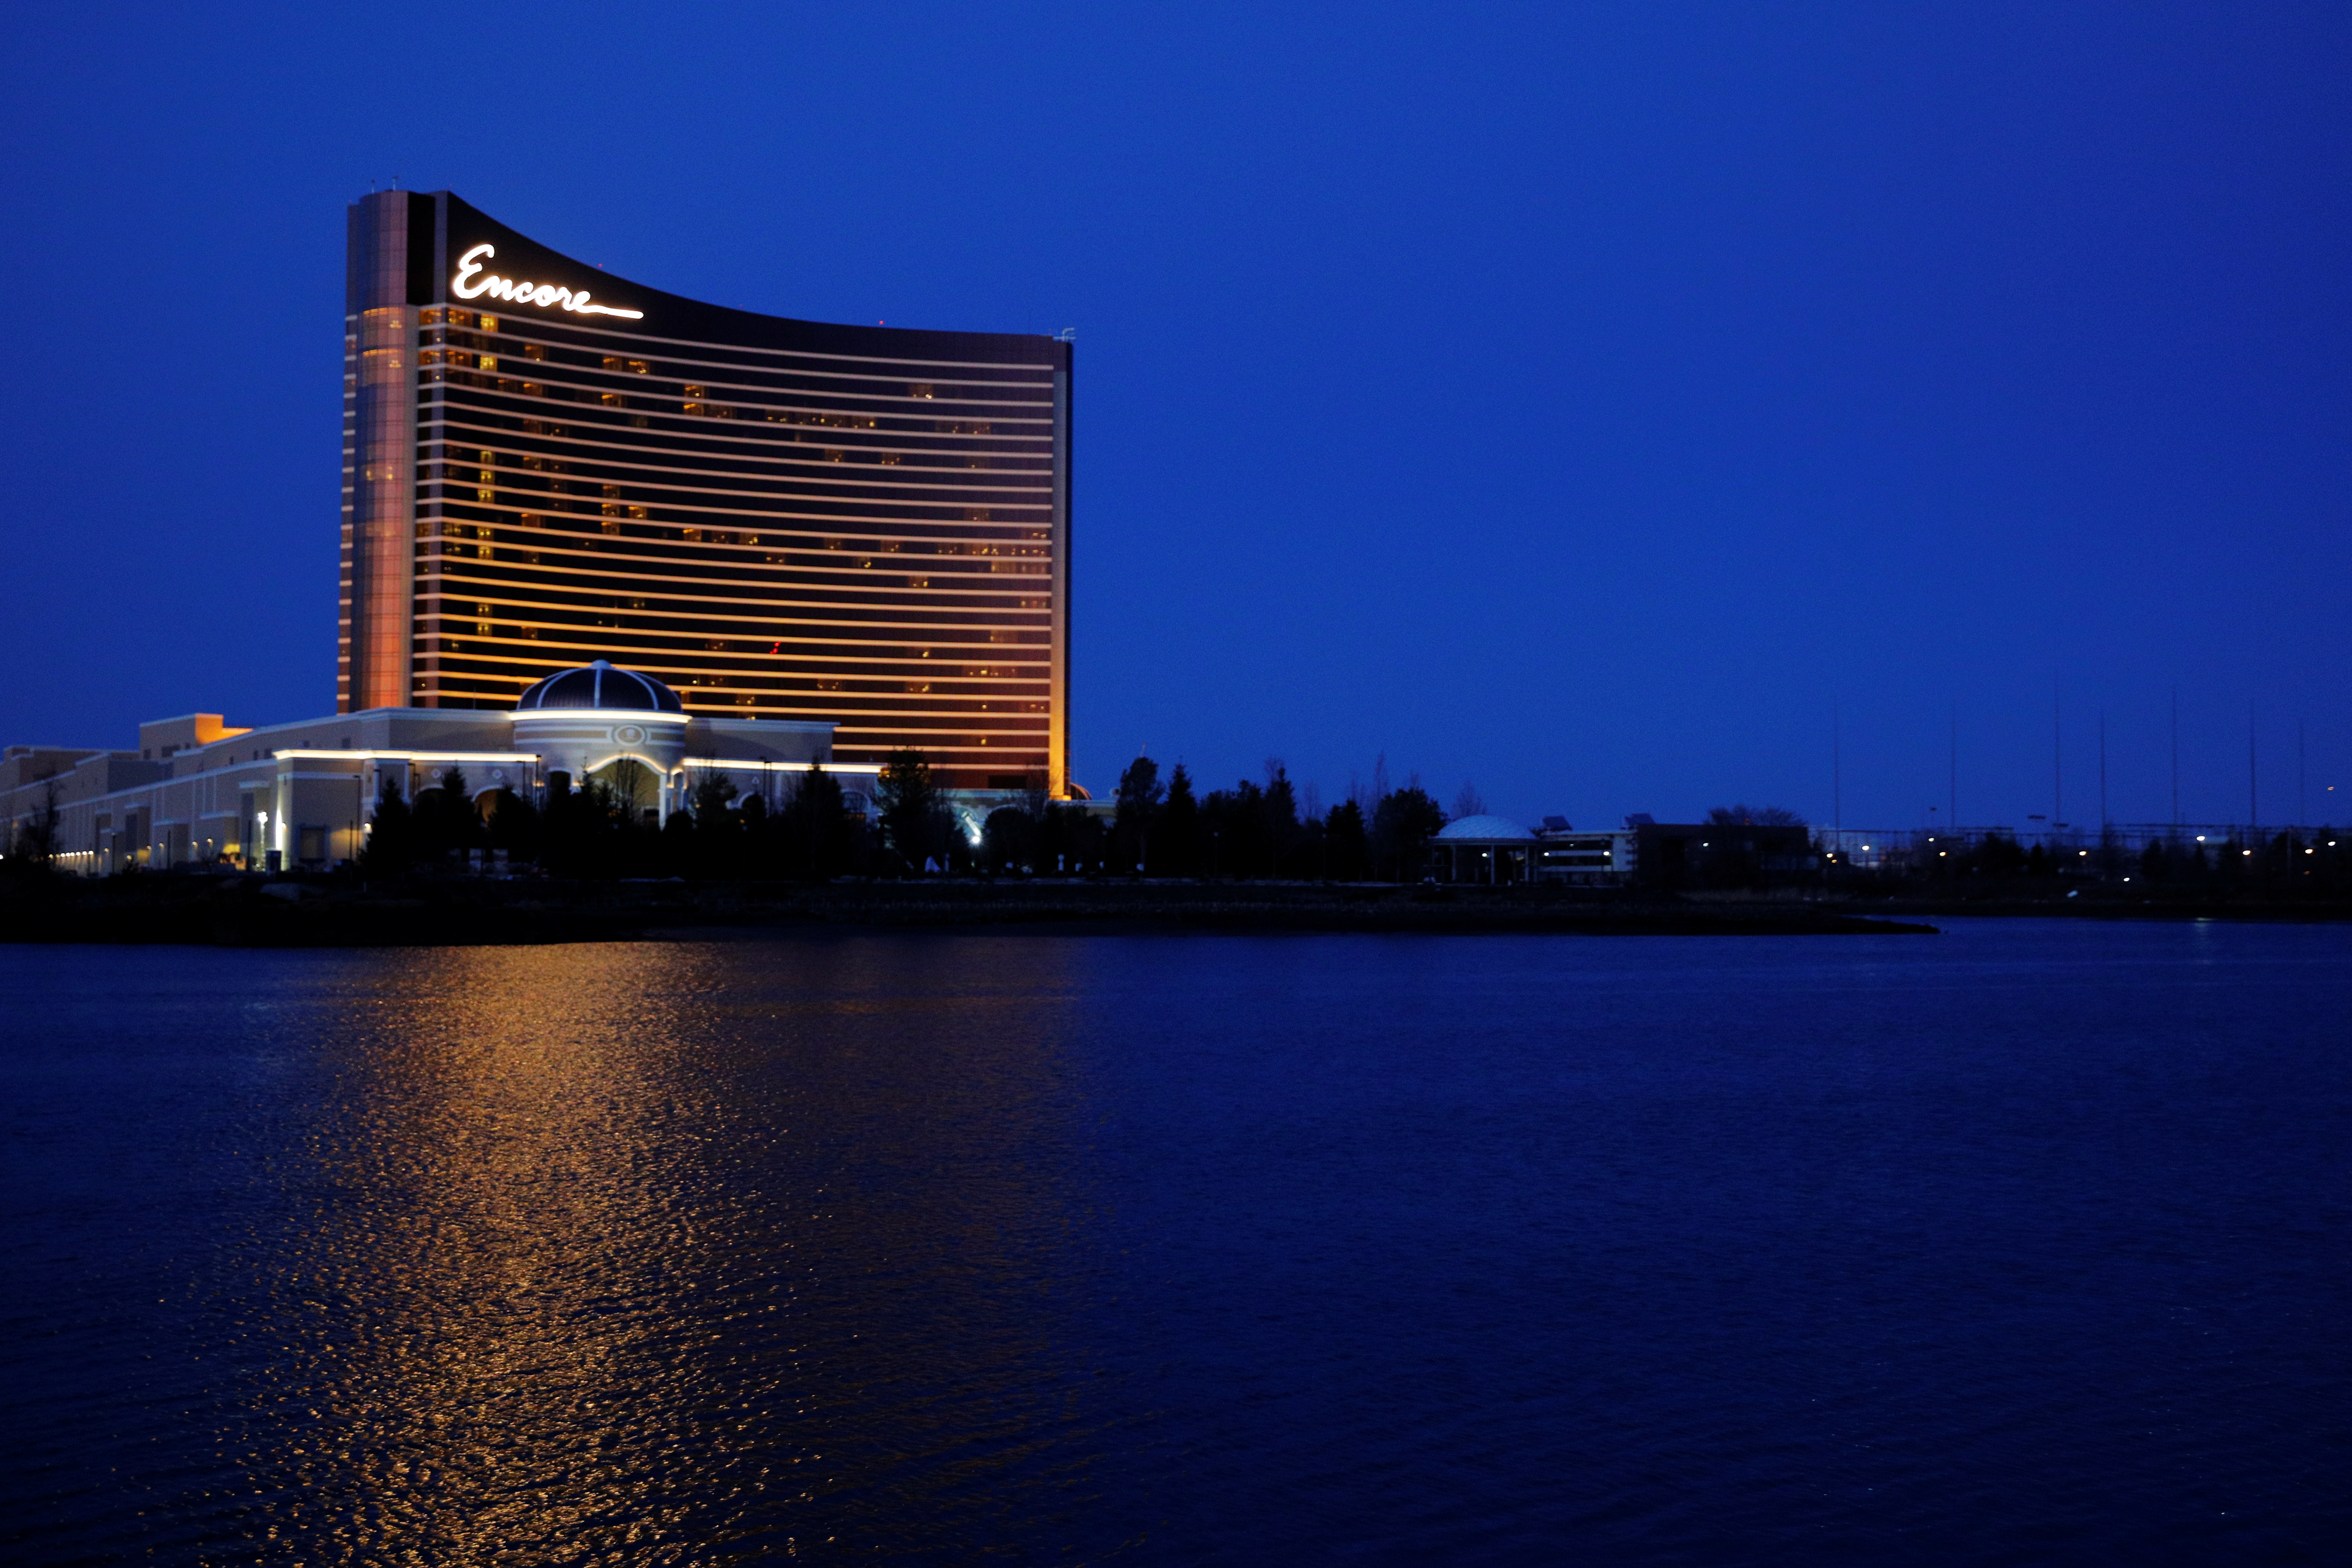 The Encore Casino, built by Wynn Resorts, stands beside the Mystic River in Everett